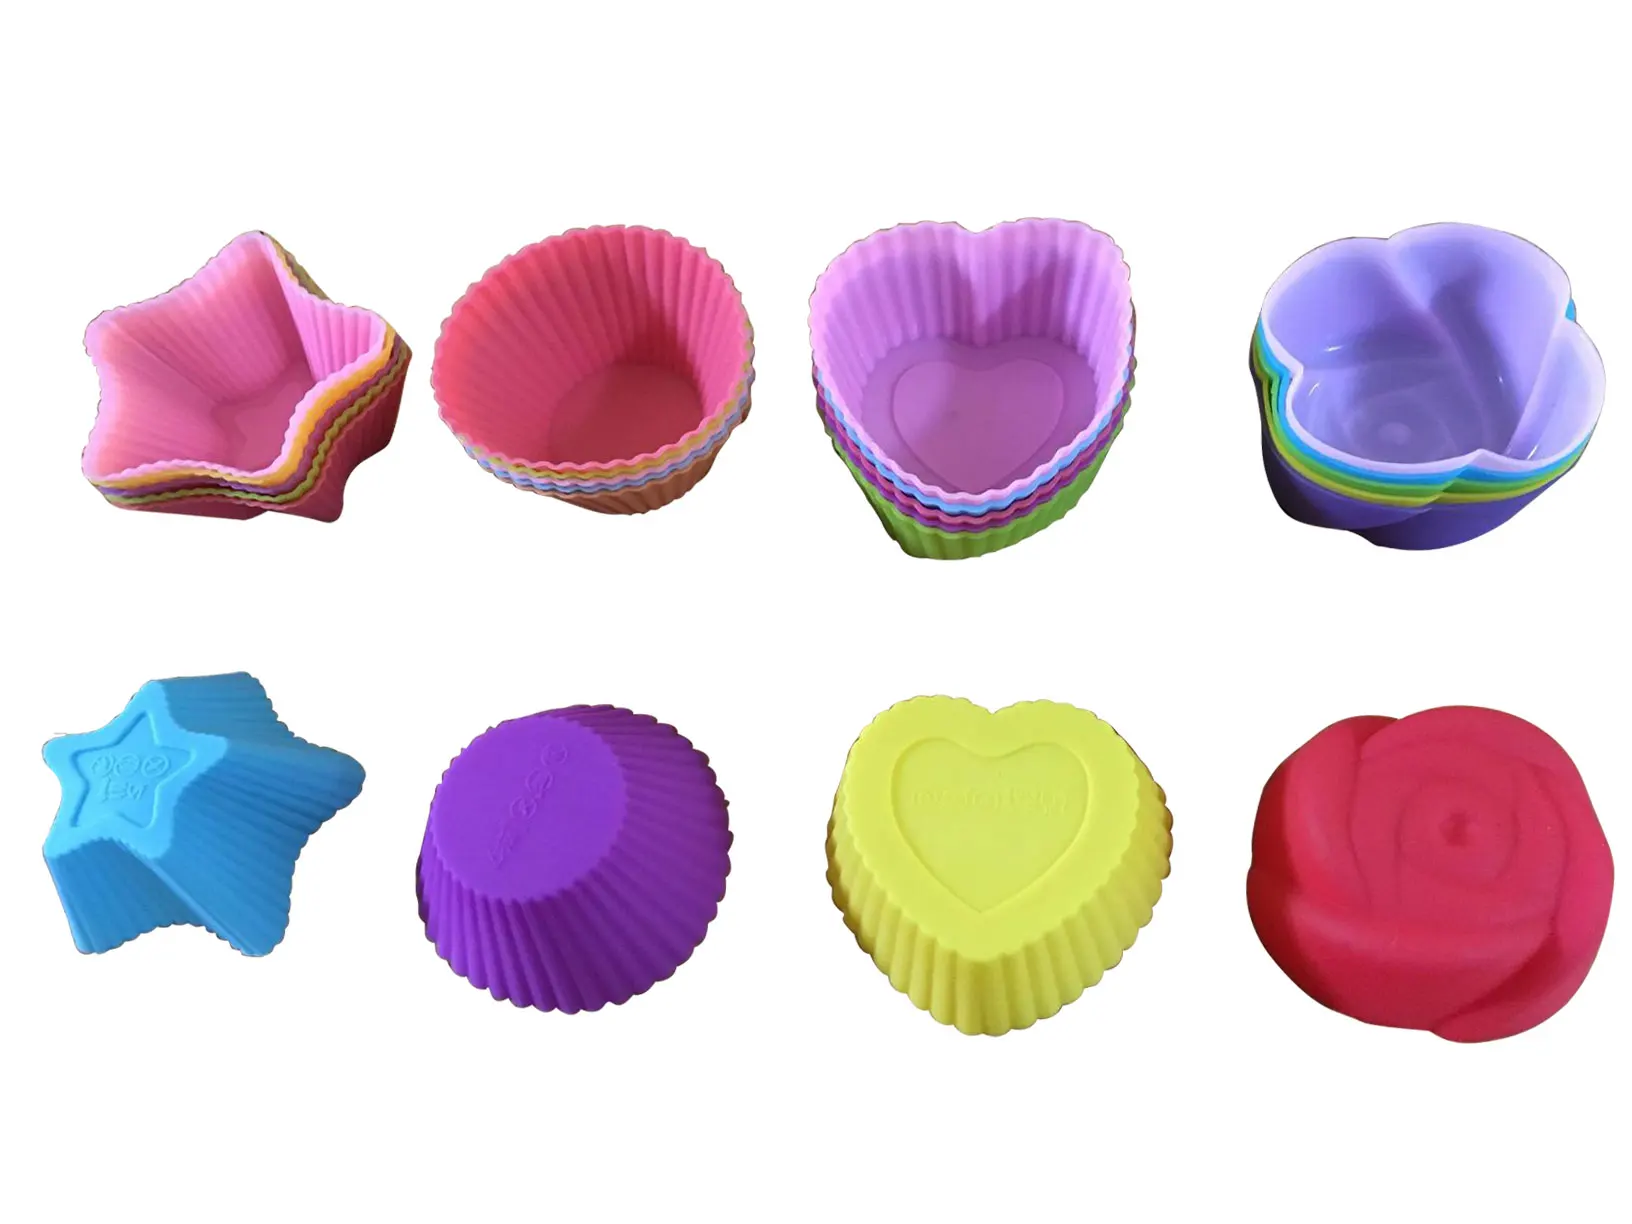 Silicone Cupcake  Reusable Baking Cups Nonstick Easy Clean Pastry Muffin Molds Set of 4 Shapes Round StarsHeart Flowers